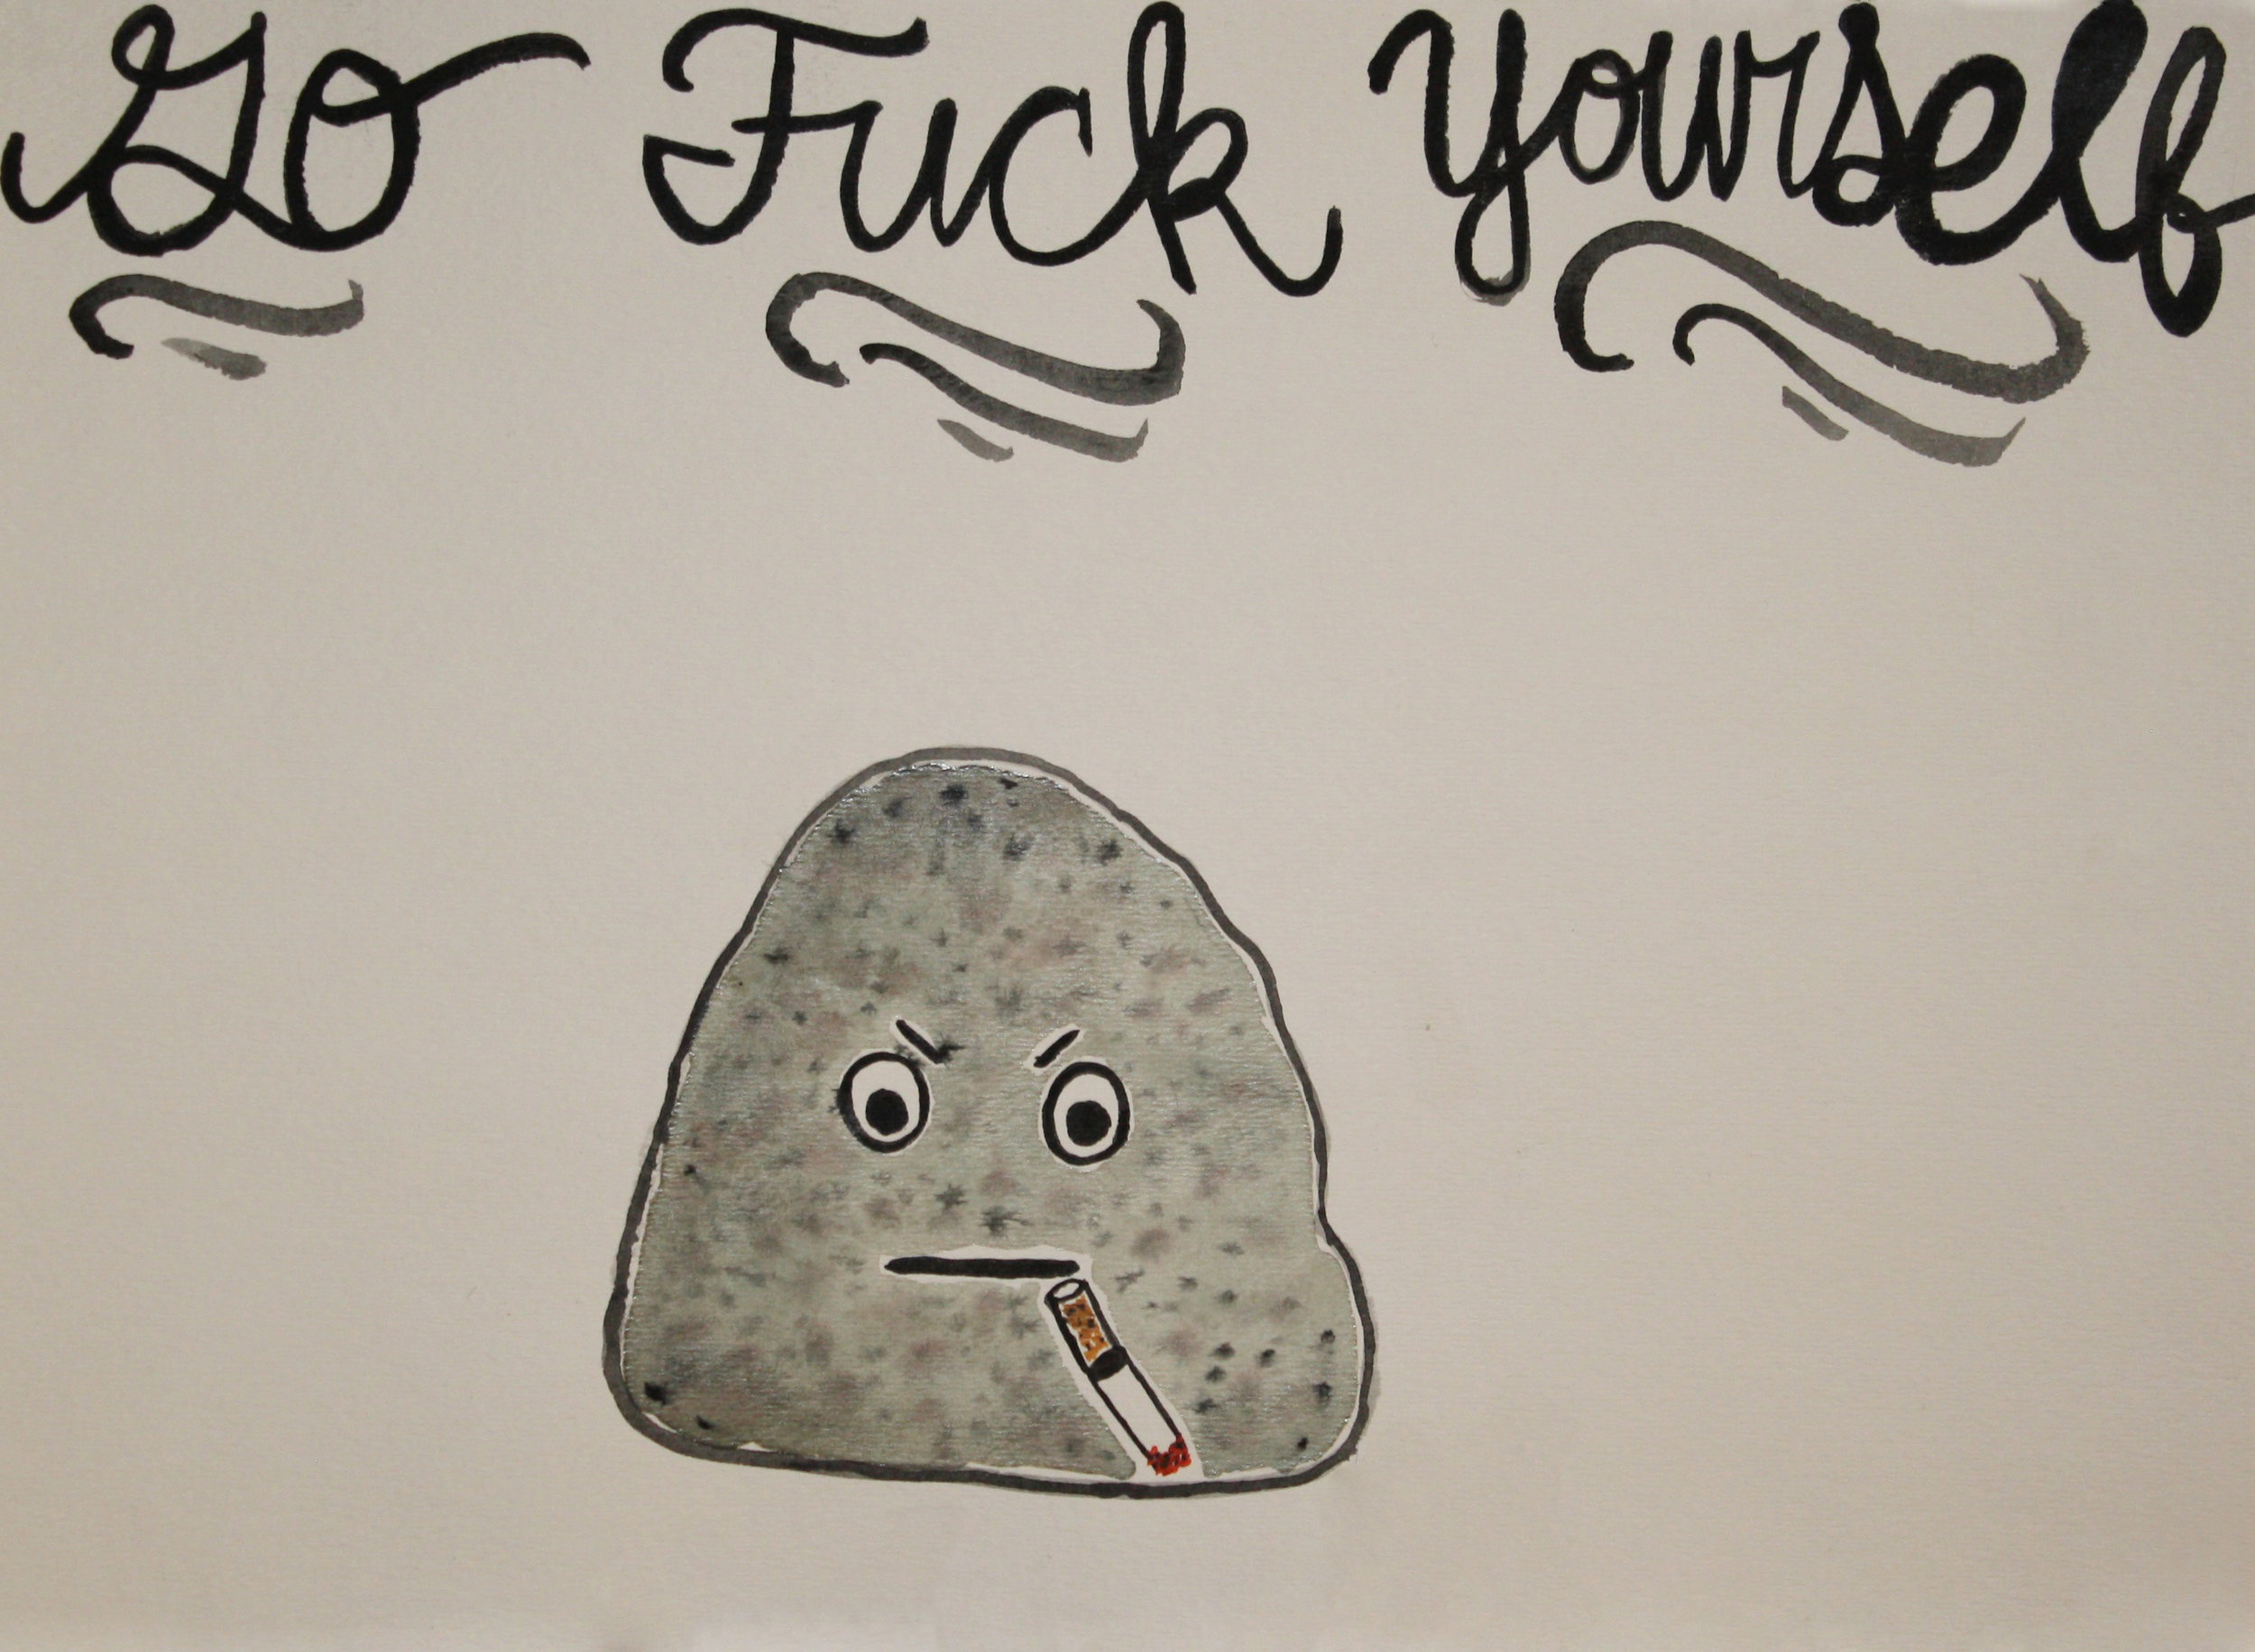   go fuck yourself   watercolor on paper  11" x 15"  2013 